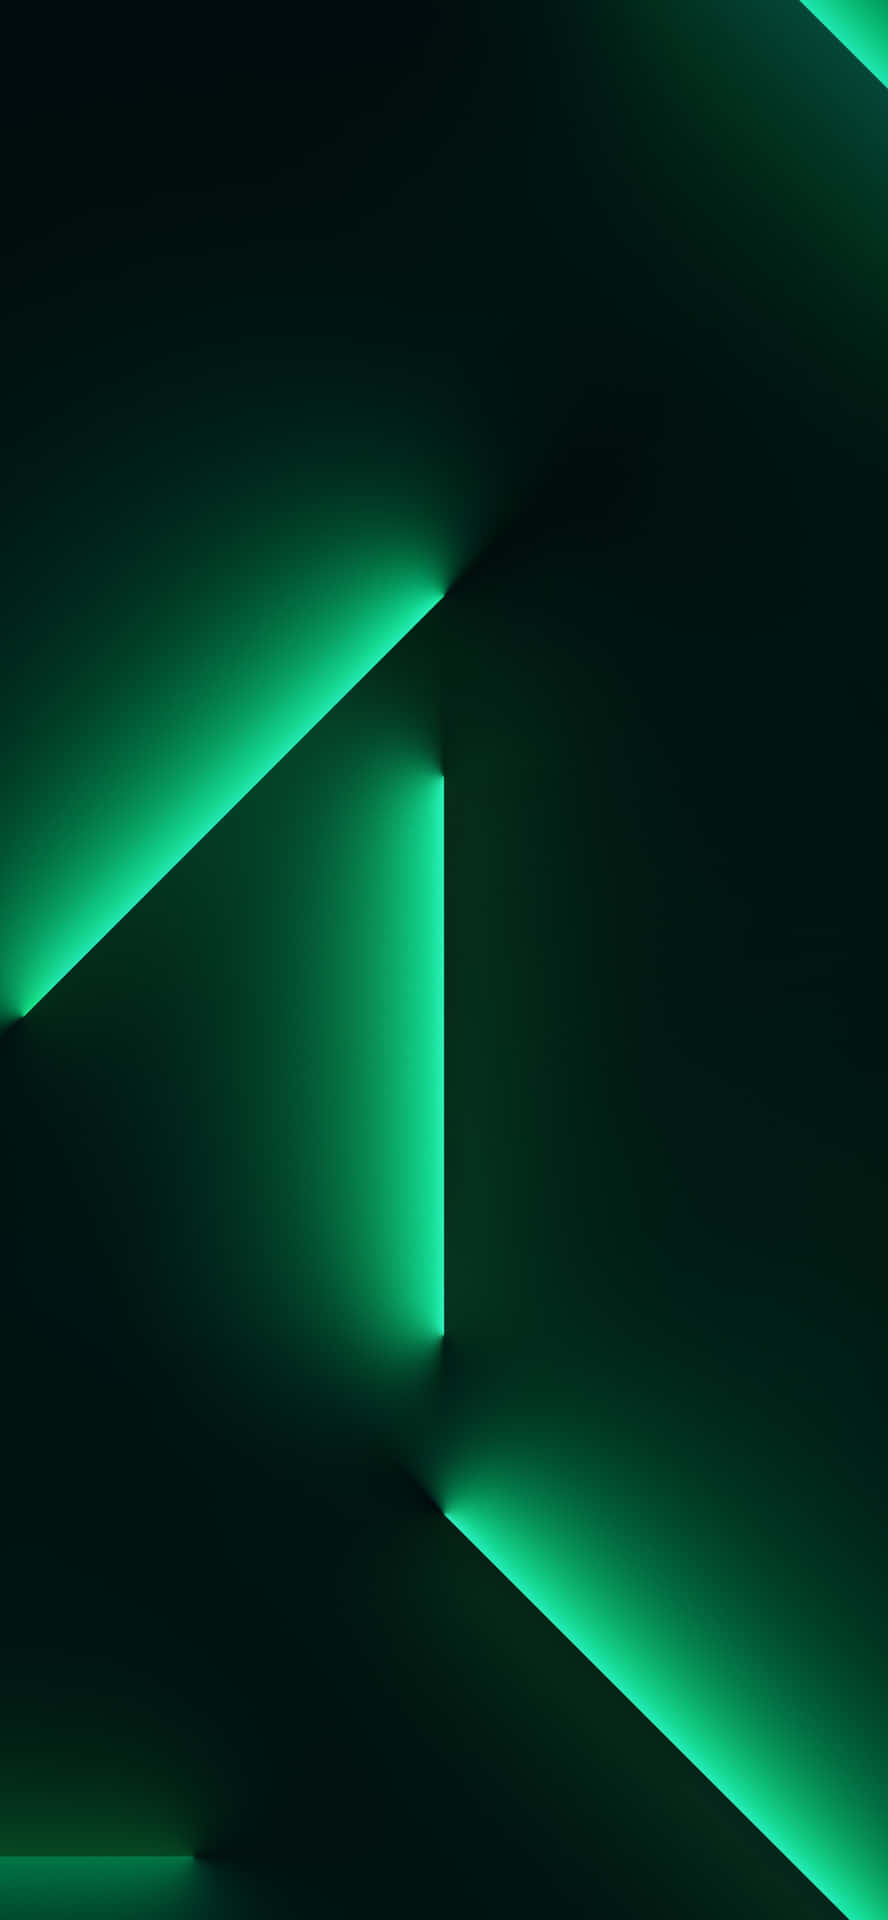 Get the green vibe with the new Iphone 11! Wallpaper